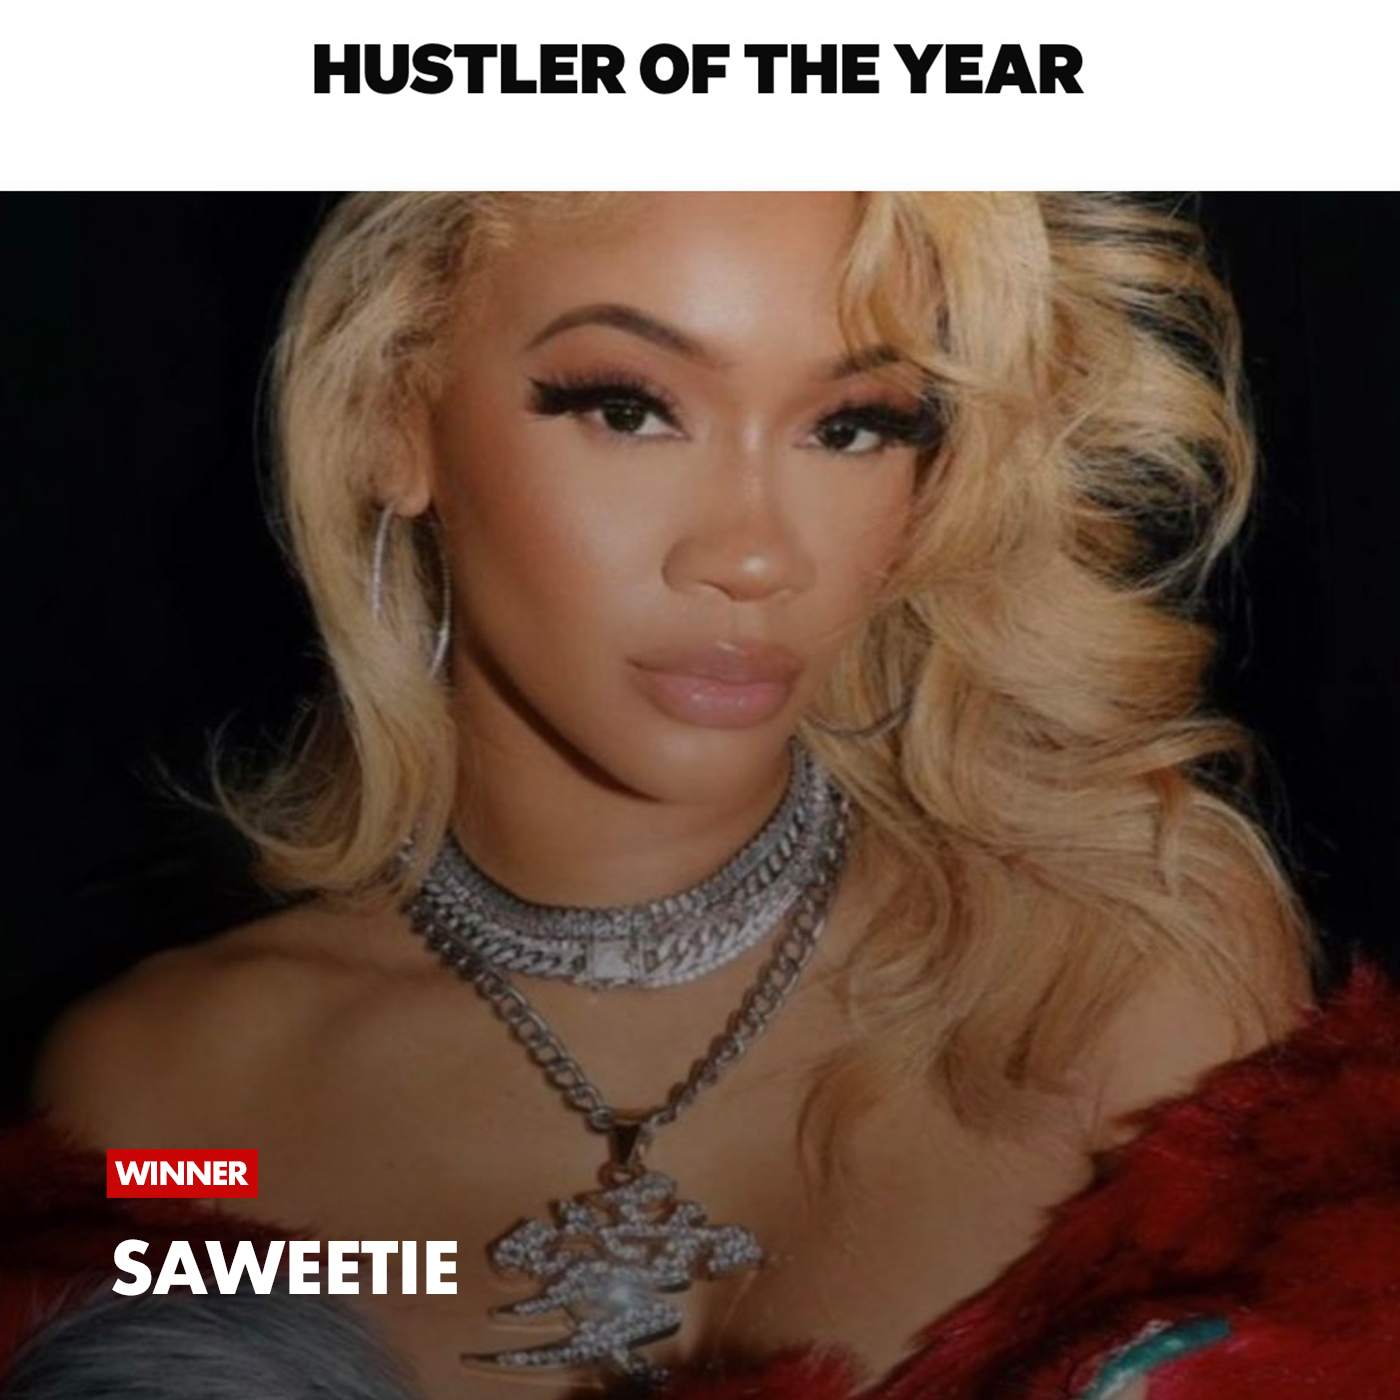 SAWEETIE WINS 'HUSTLER OF THE YEAR' AT THE 2021 BET HIP HOP AWARDS